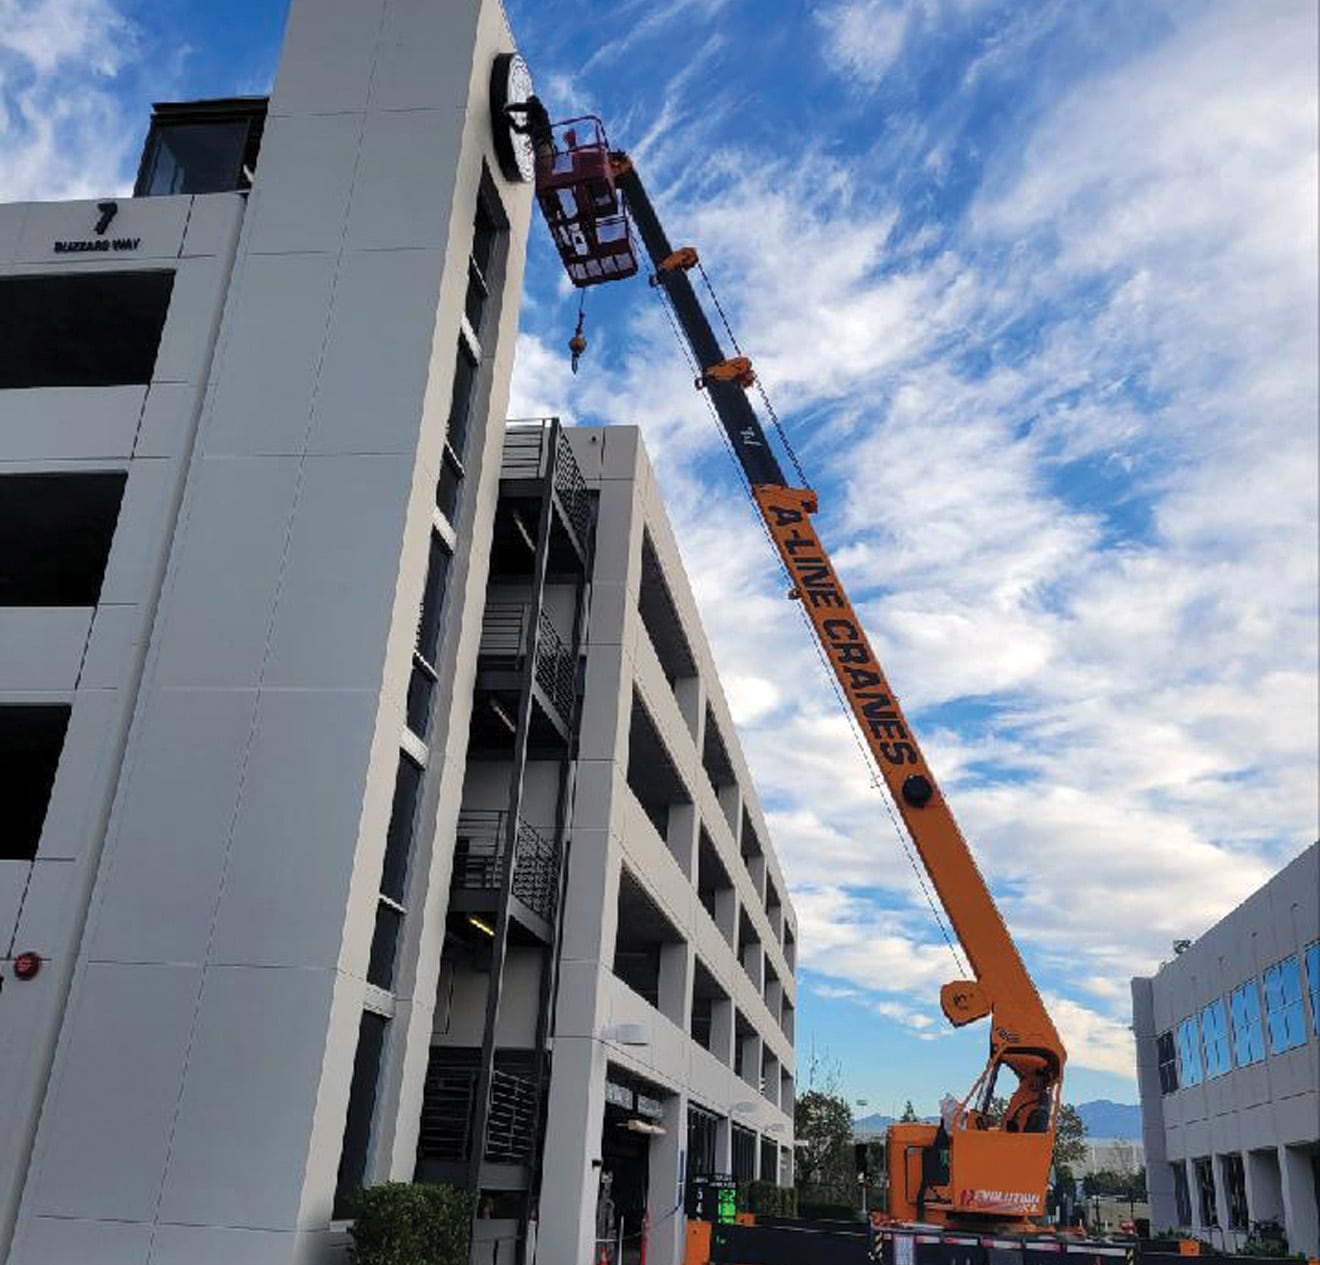 Crane lifting man in man basket to change sign on a building